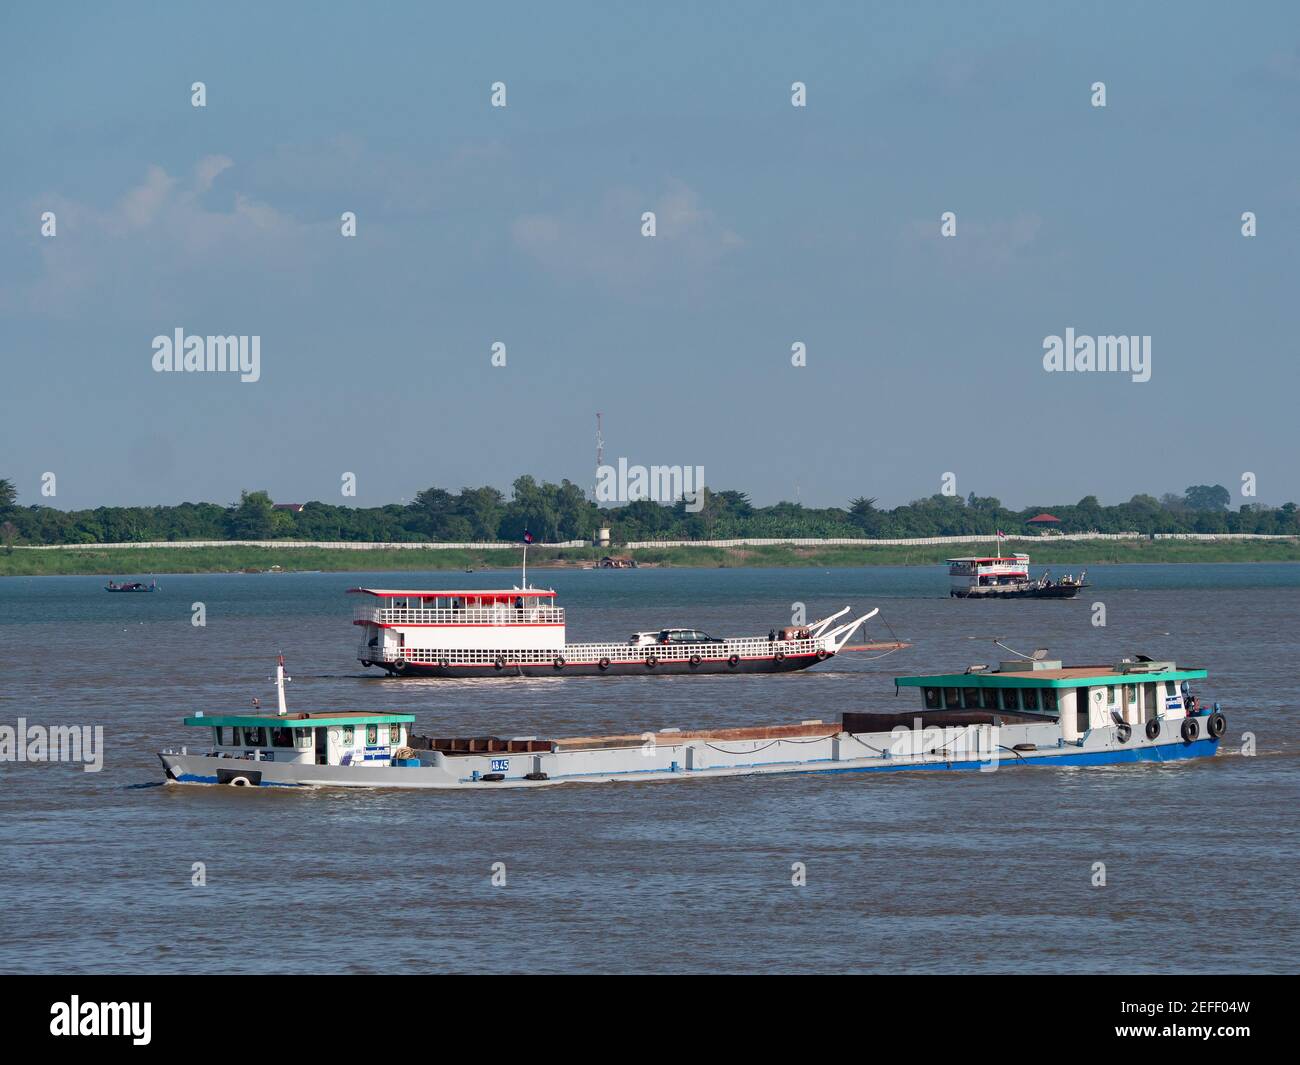 Cargo vessels and car ferries on Chaktomuk river, where Tonle Sap and Mekong rivers meet in Phnom Penh, Cambodia. Stock Photo